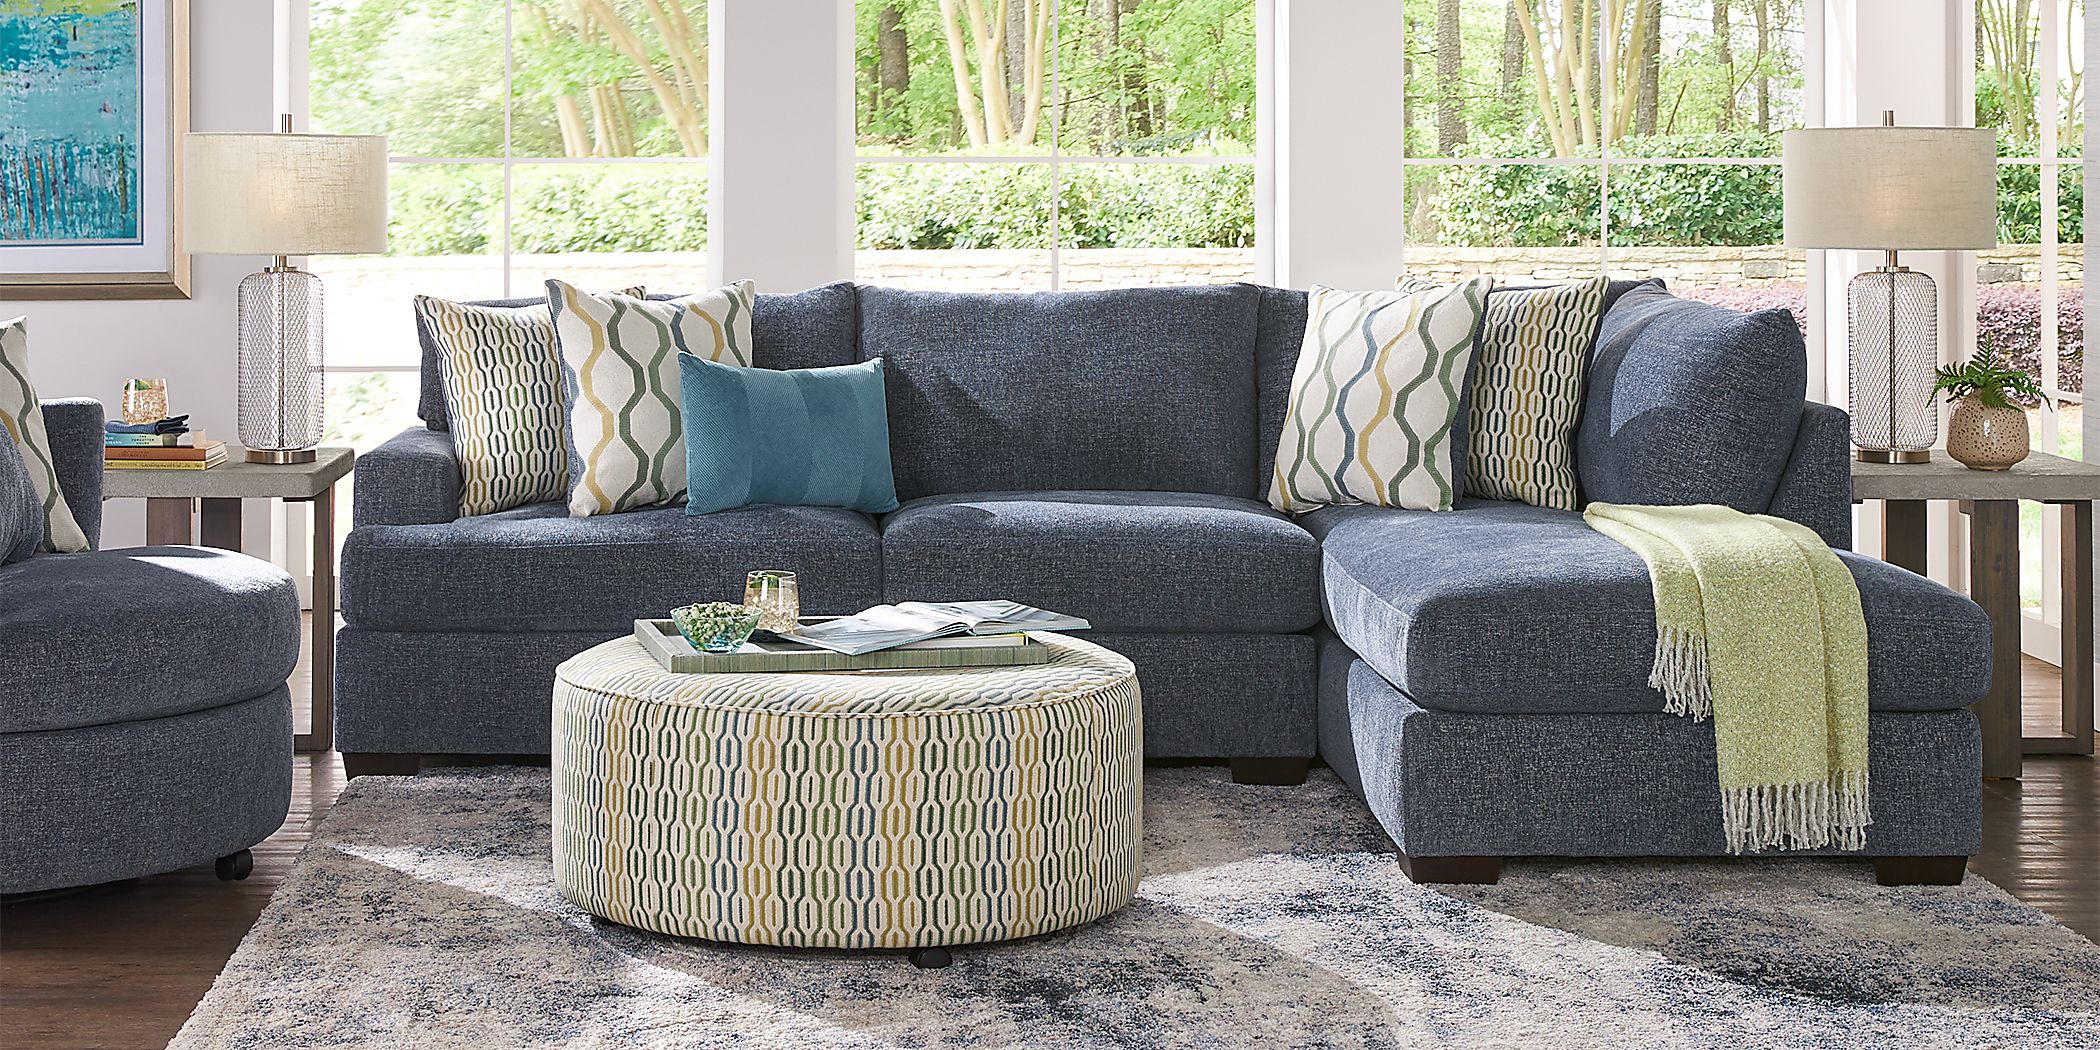 Briar Street Blue Chenille 6 Pc Sectional Living Room